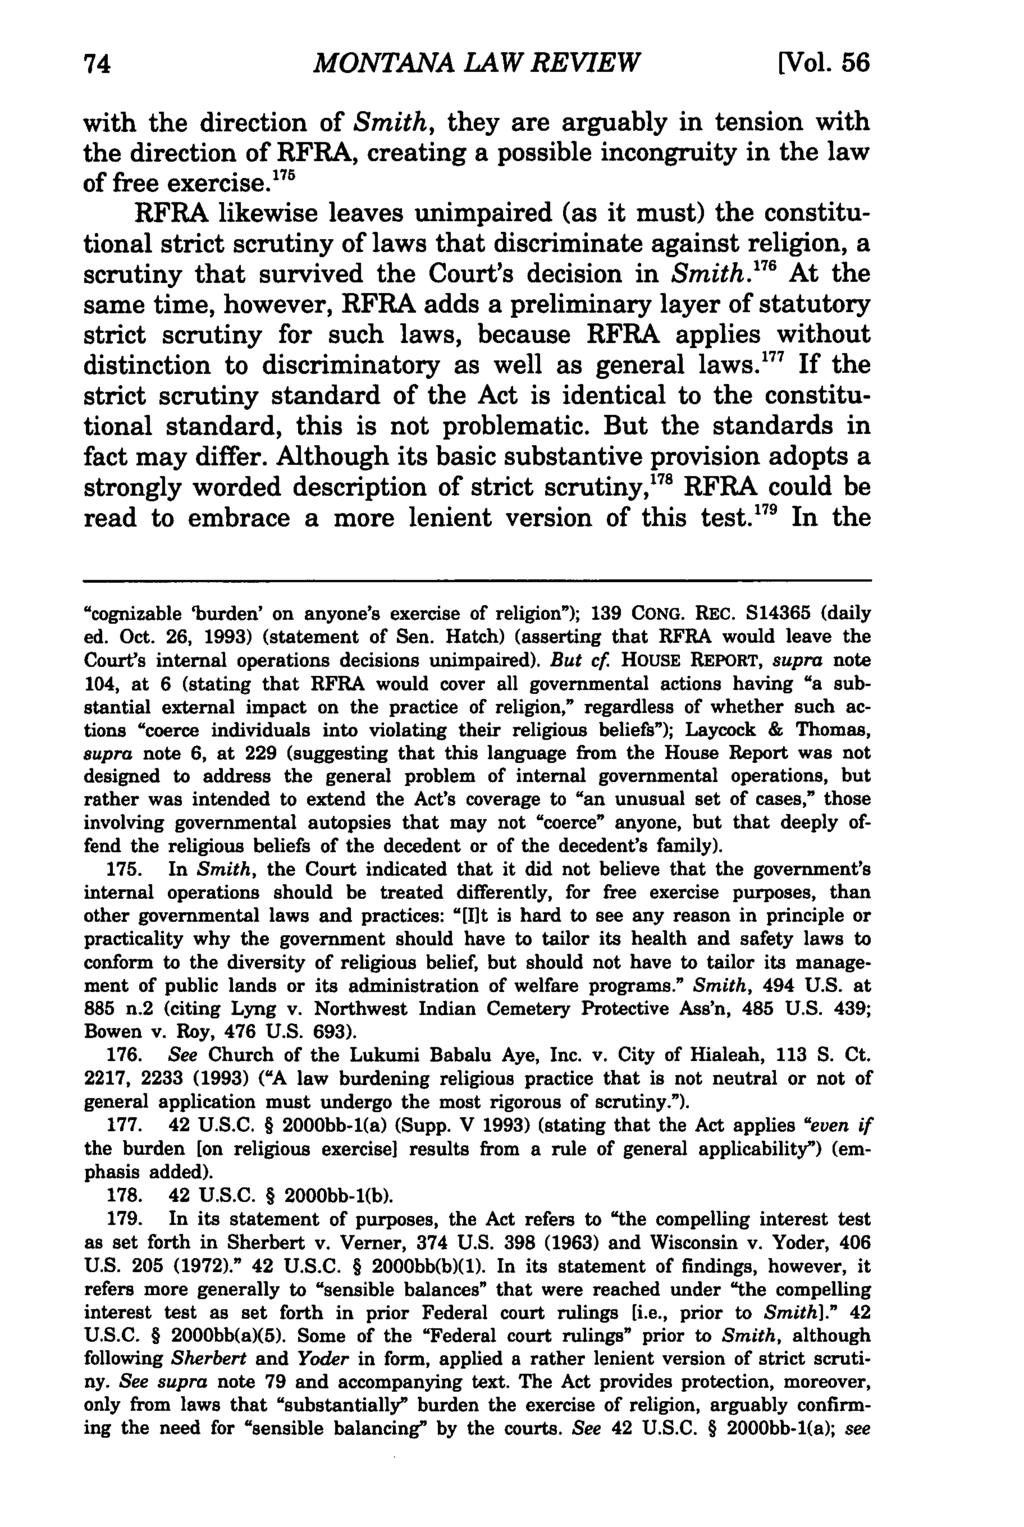 74 MONTANA Montana Law Review, LAW Vol. 56 REVIEW [1995], Iss. 1, Art. 3 [Vol.